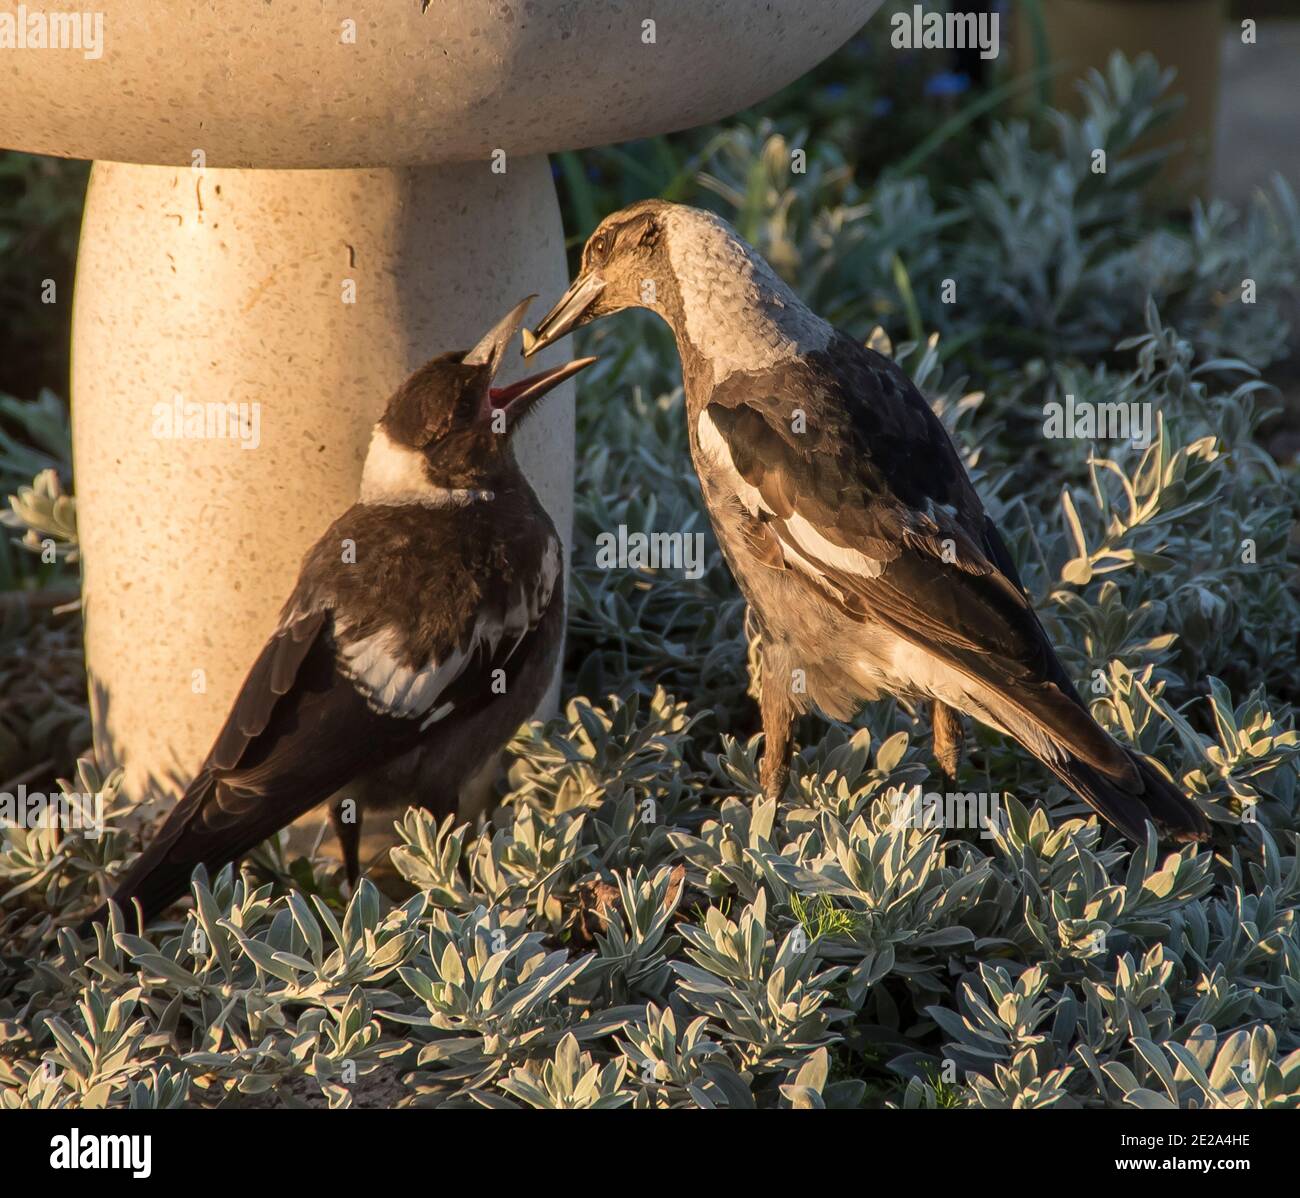 An adult Australian Magpie (cracticus tibicen) feeding a young magpie, with beak open ready for food. Private garden in Queensland, Australia. Stock Photo